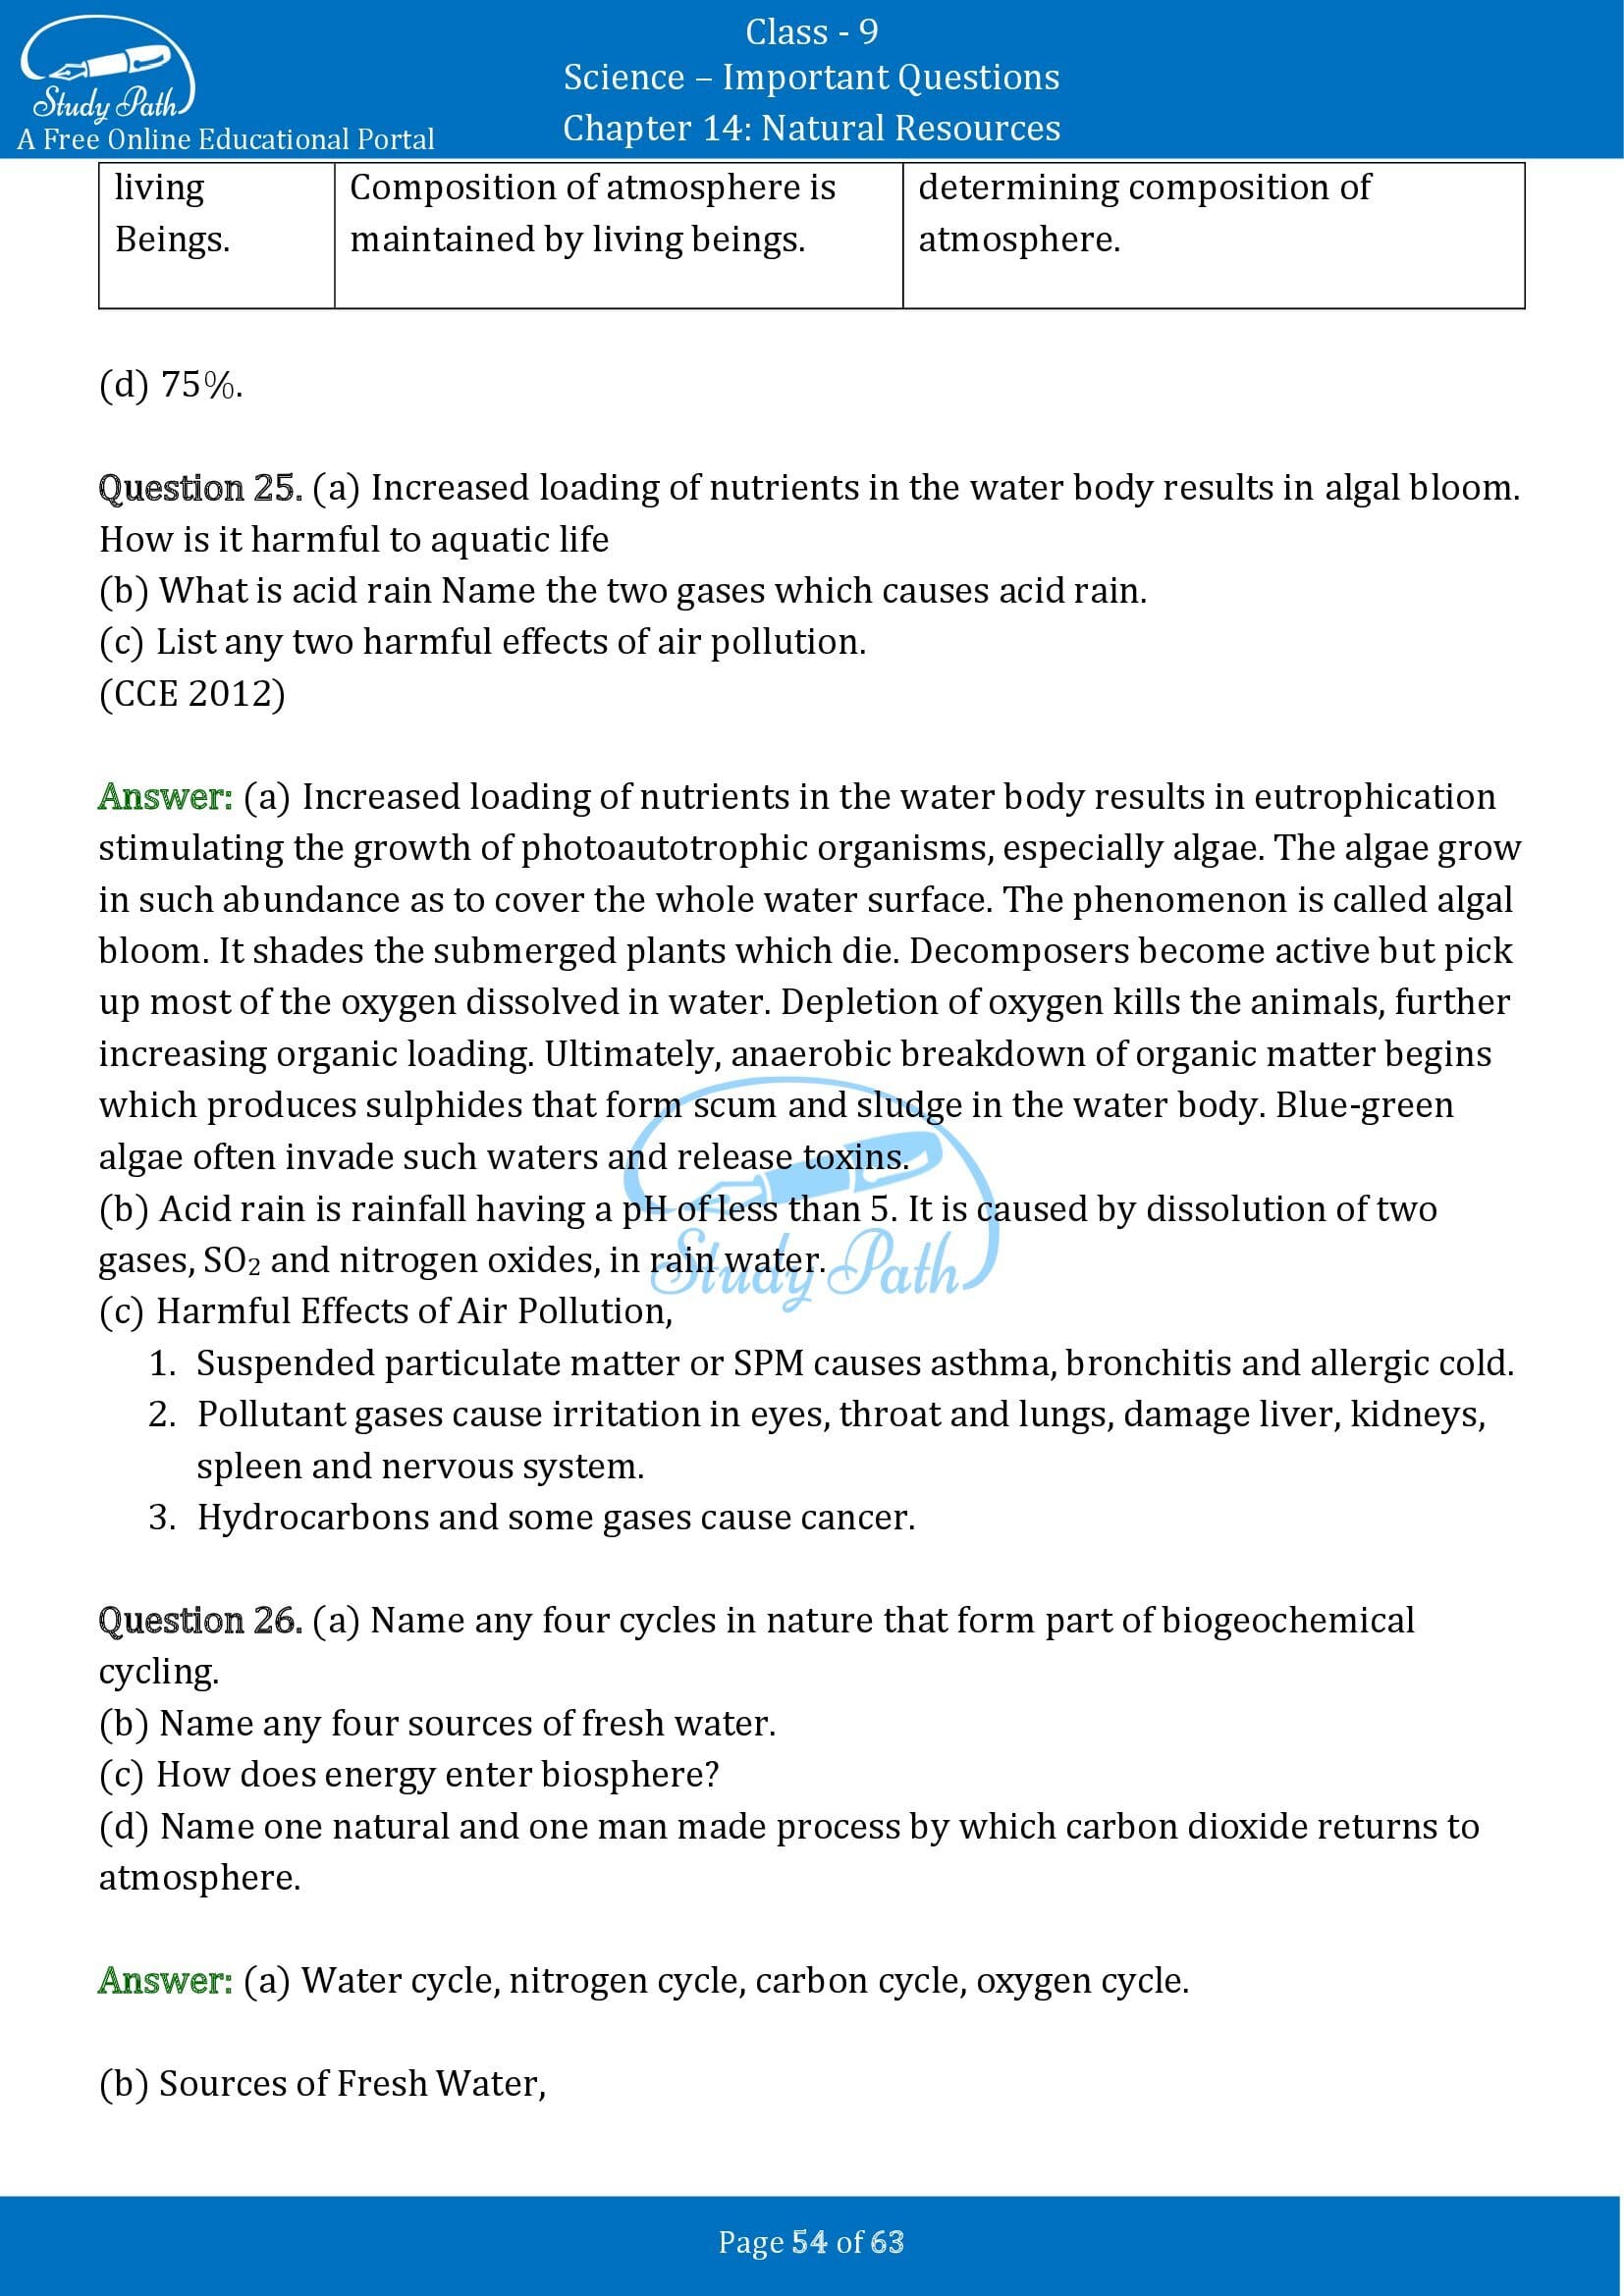 Important Questions for Class 9 Science Chapter 14 Natural Resources 00054